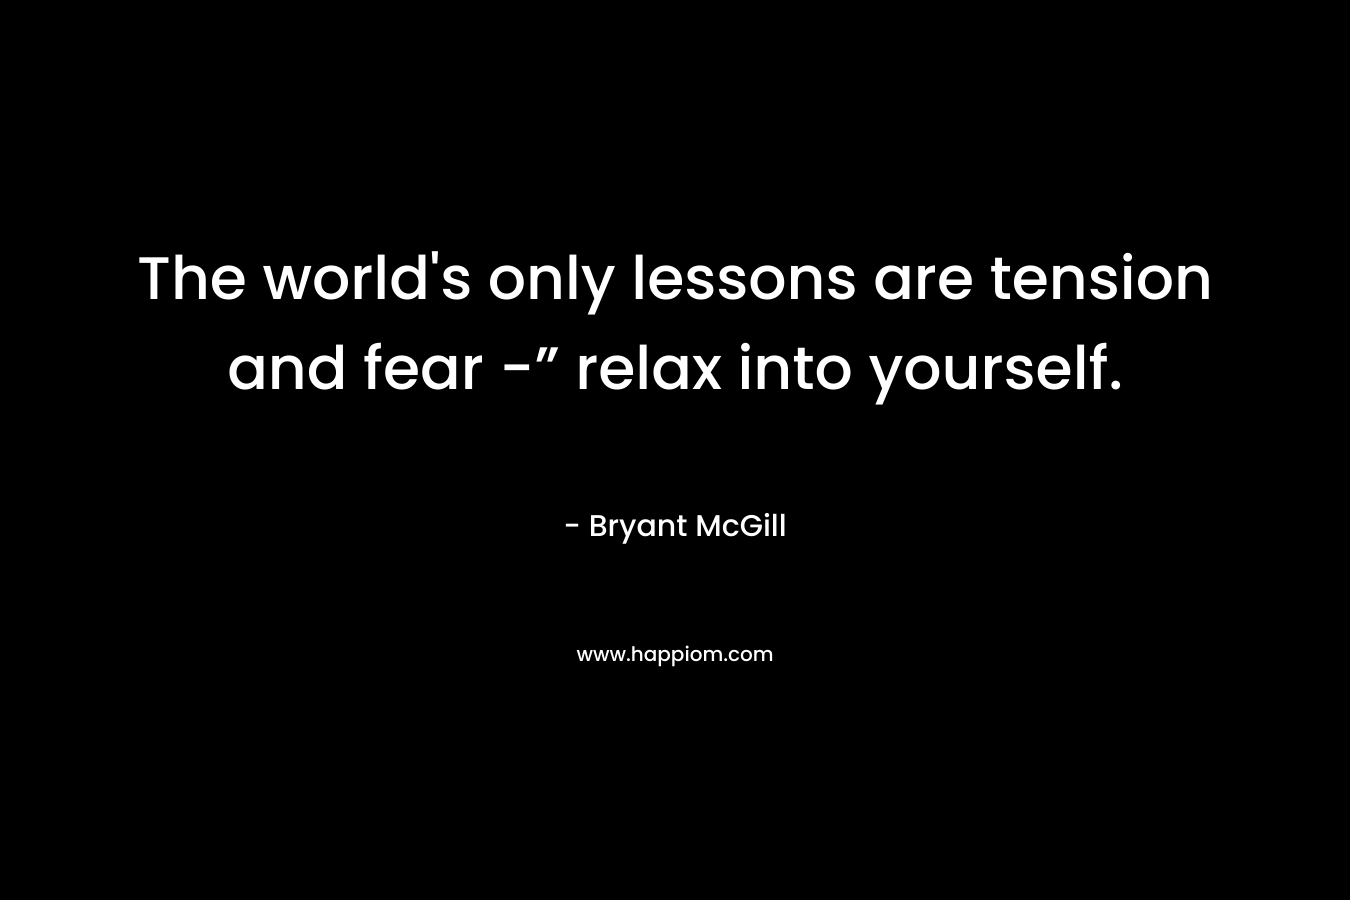 The world's only lessons are tension and fear -” relax into yourself.